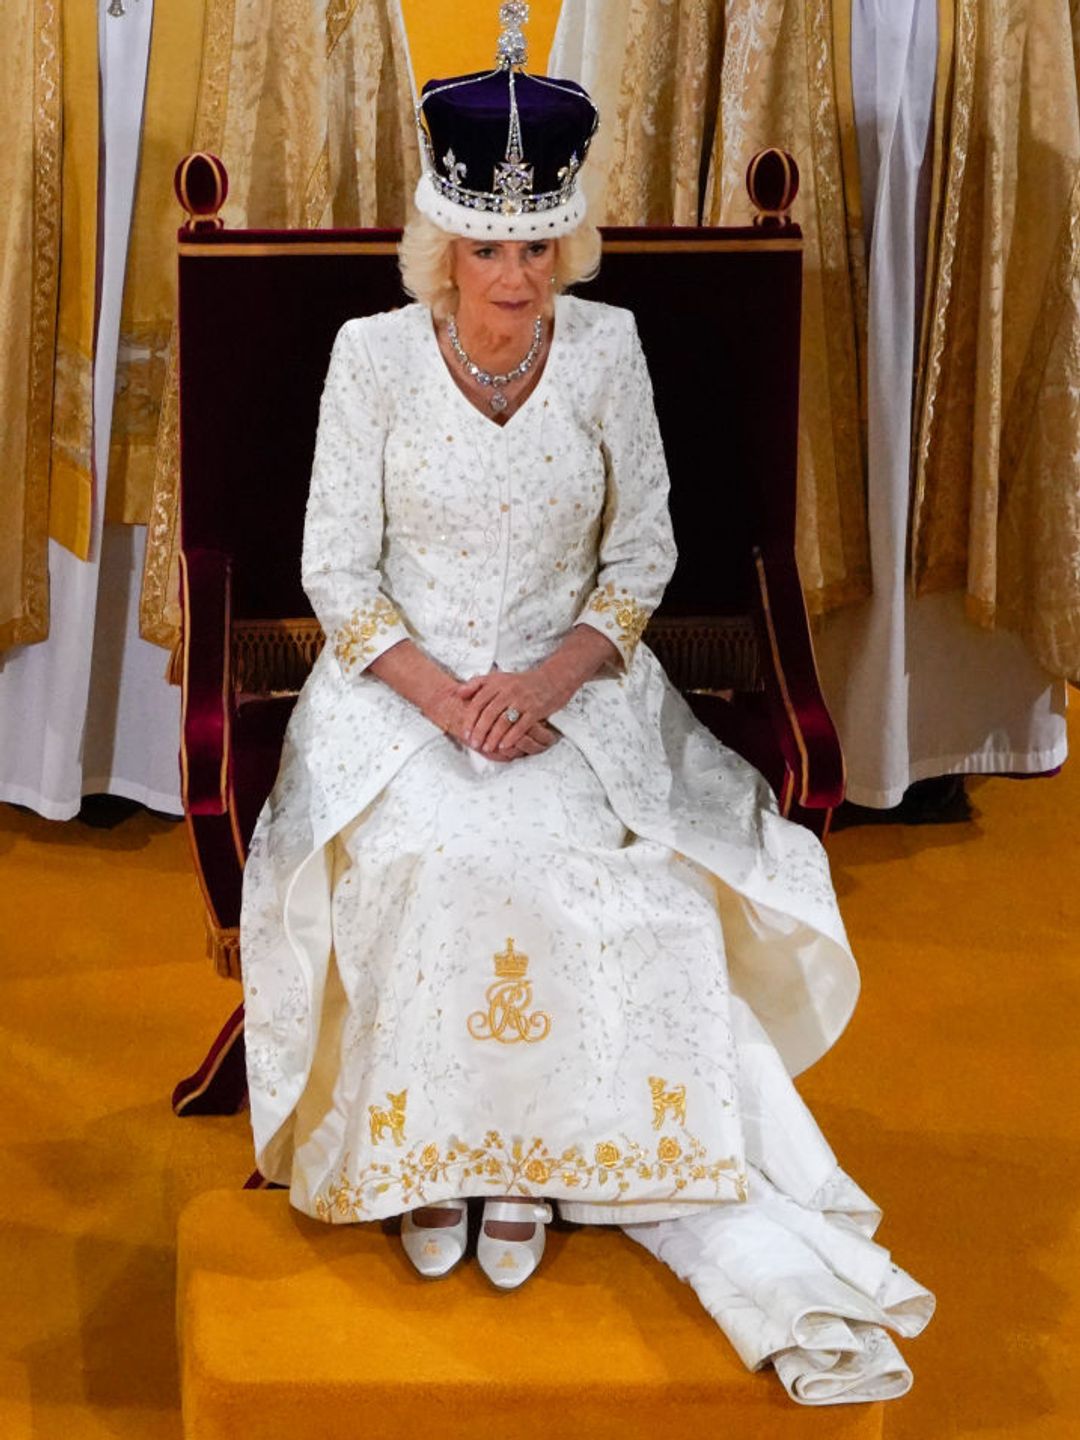 Queen Camilla's dress had been embroidered with two terriers in golden thread 